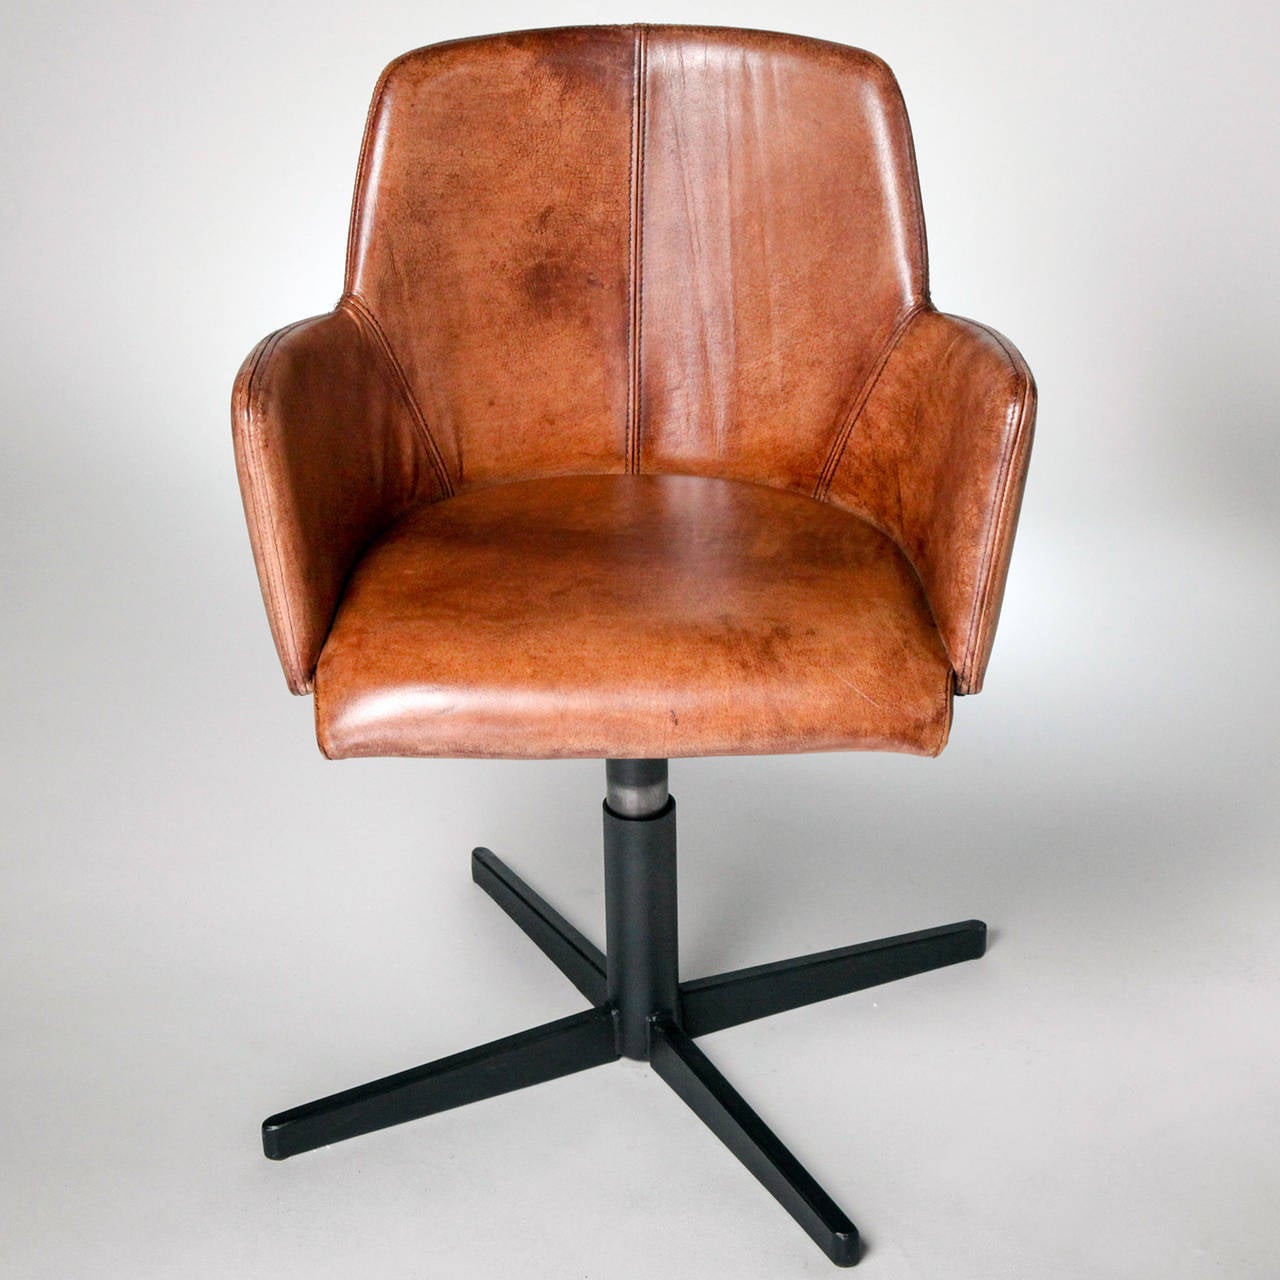 Limited edition swivel style chair in mottled brown leather. Black metal base.